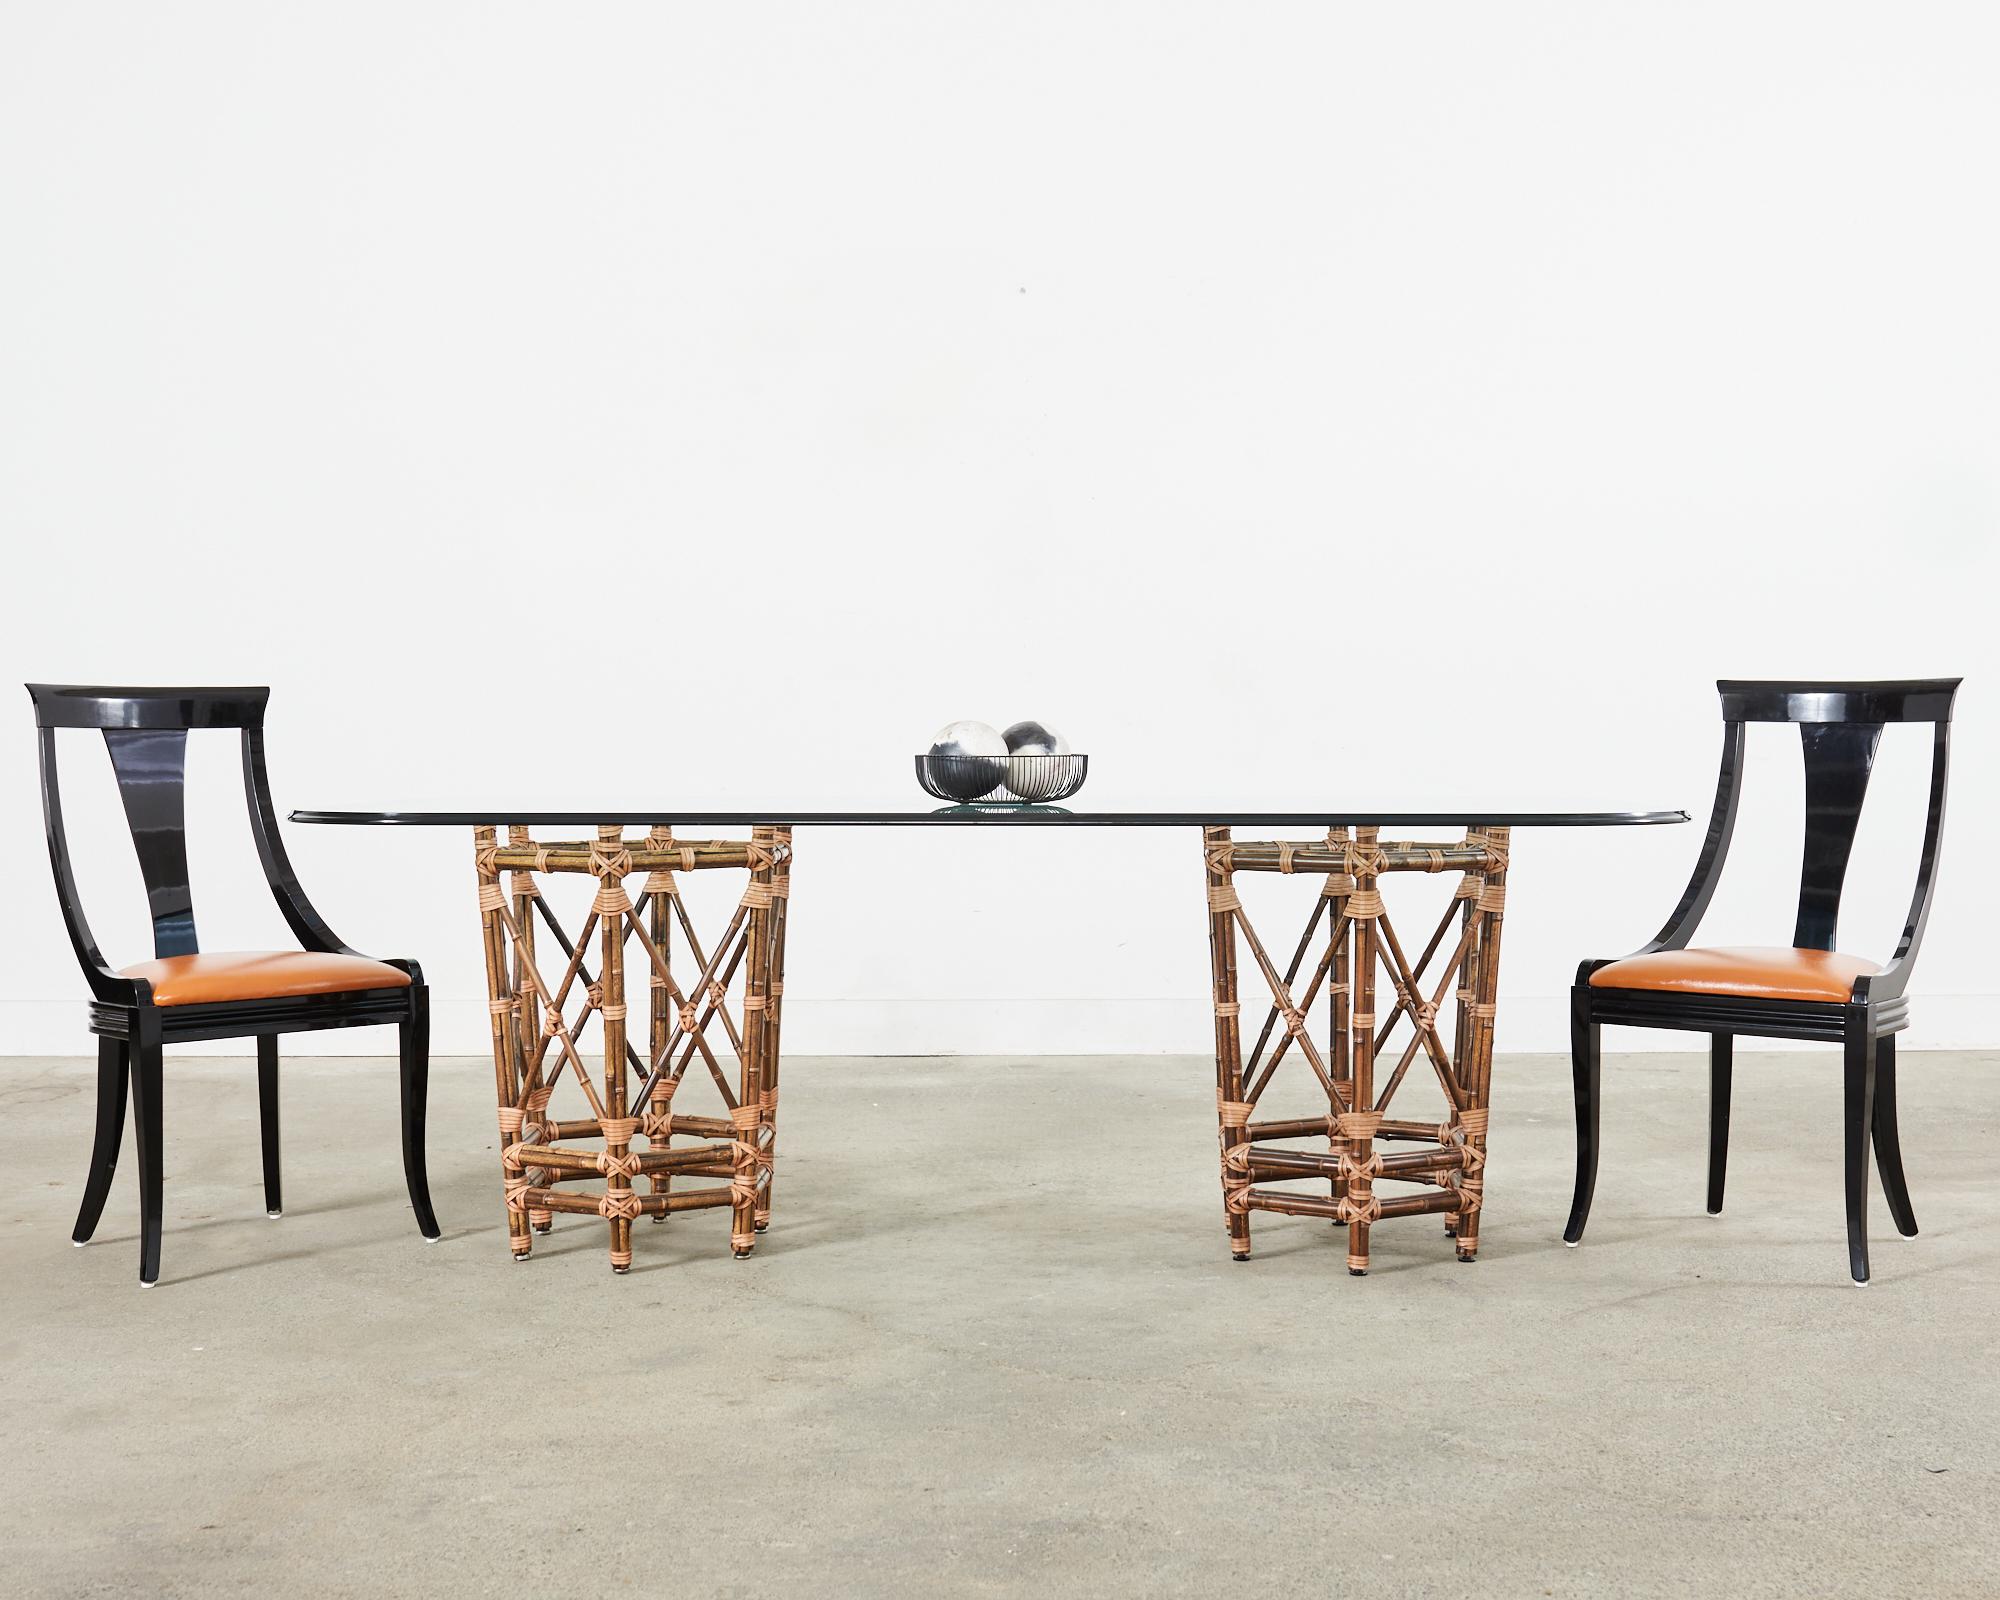 Large bespoke dining table made in the California coastal organic modern style by McGuire. The table features double pedestal basket shaped supports crafted from iron. The iron frames are painted golden gate orange for authenticity and covered with